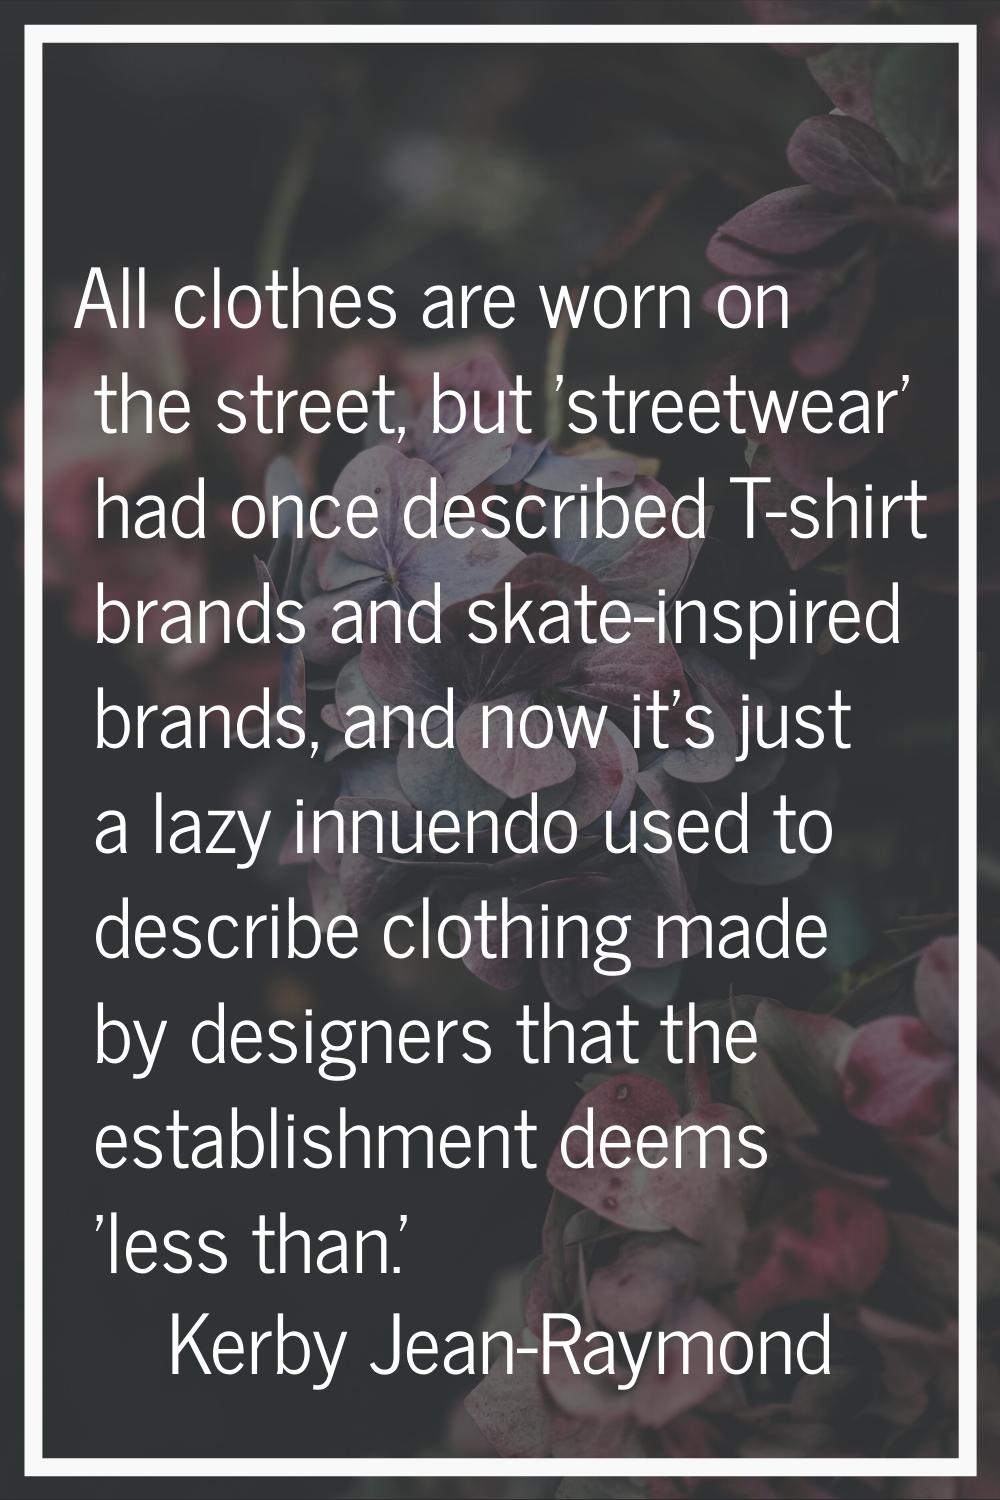 All clothes are worn on the street, but 'streetwear' had once described T-shirt brands and skate-in